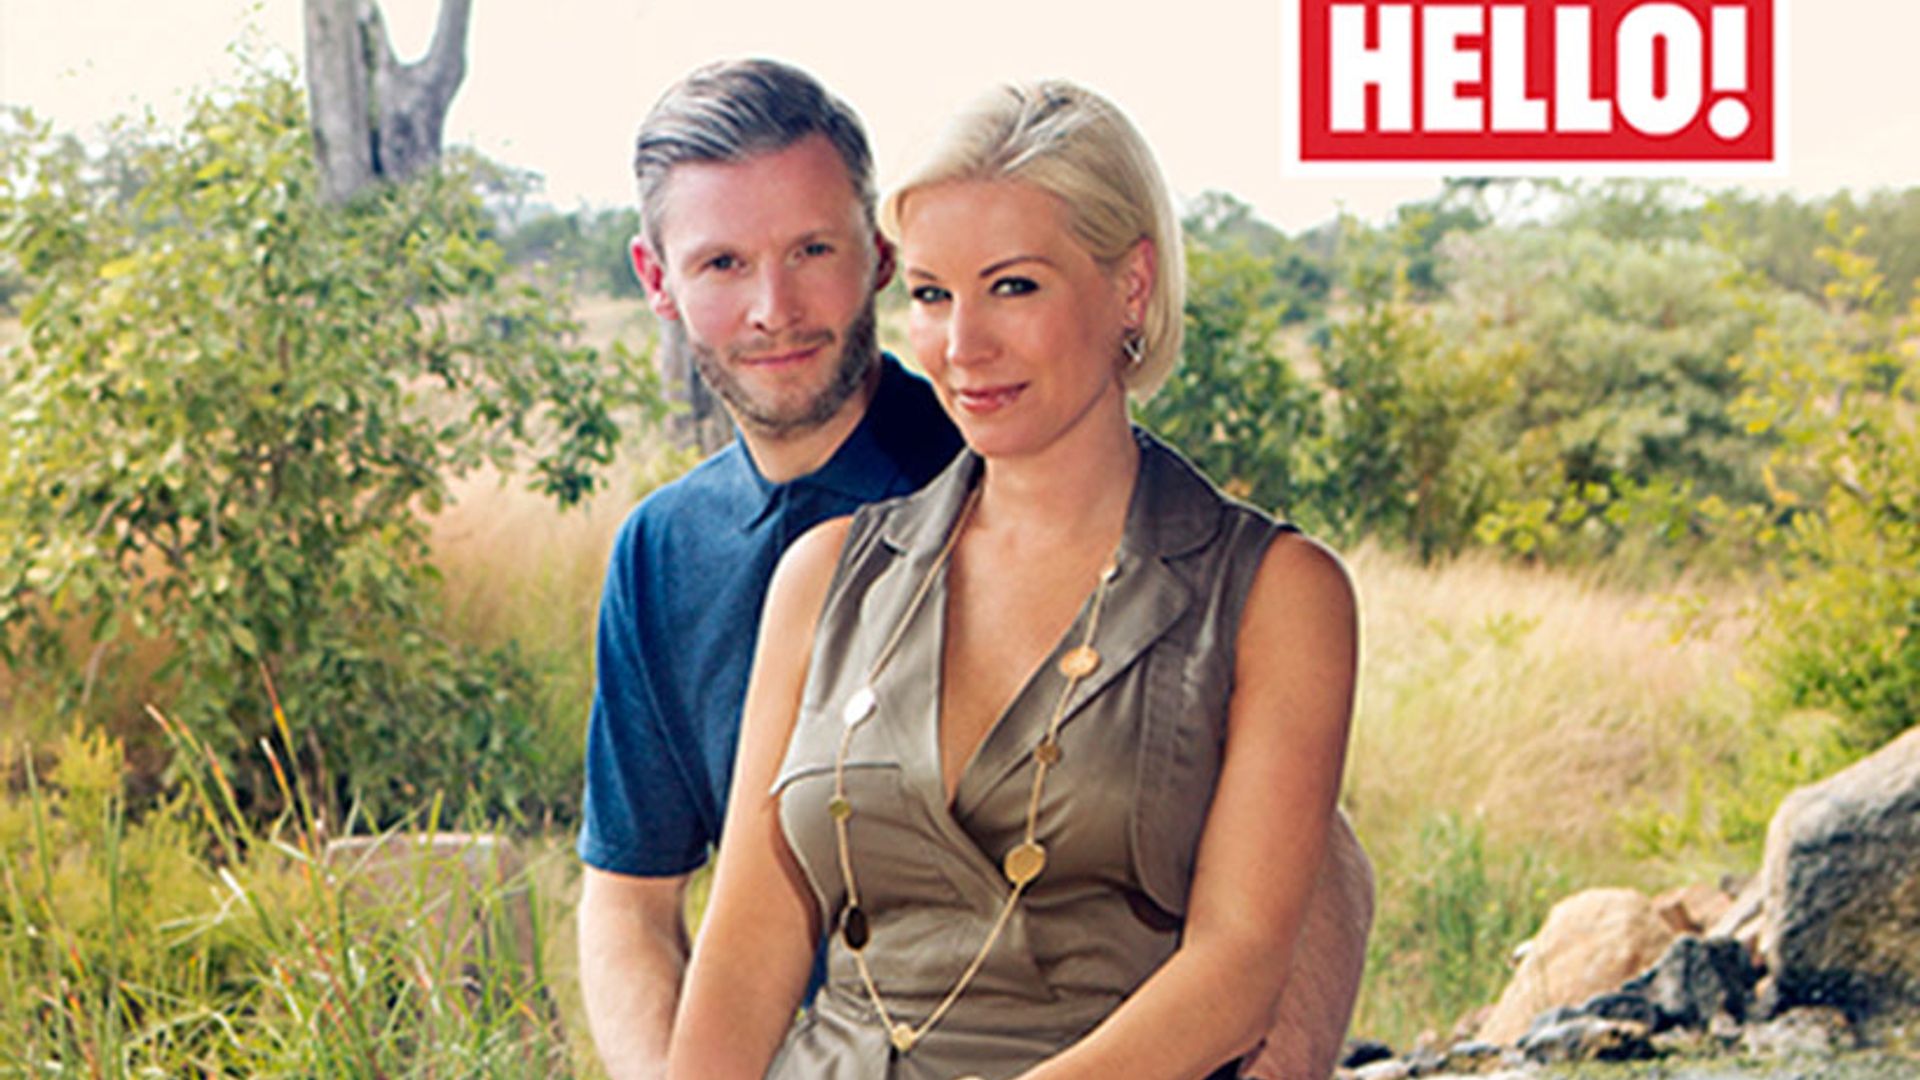 Exclusive! Denise Van Outen and boyfriend Eddie Boxshall open up about their relationship